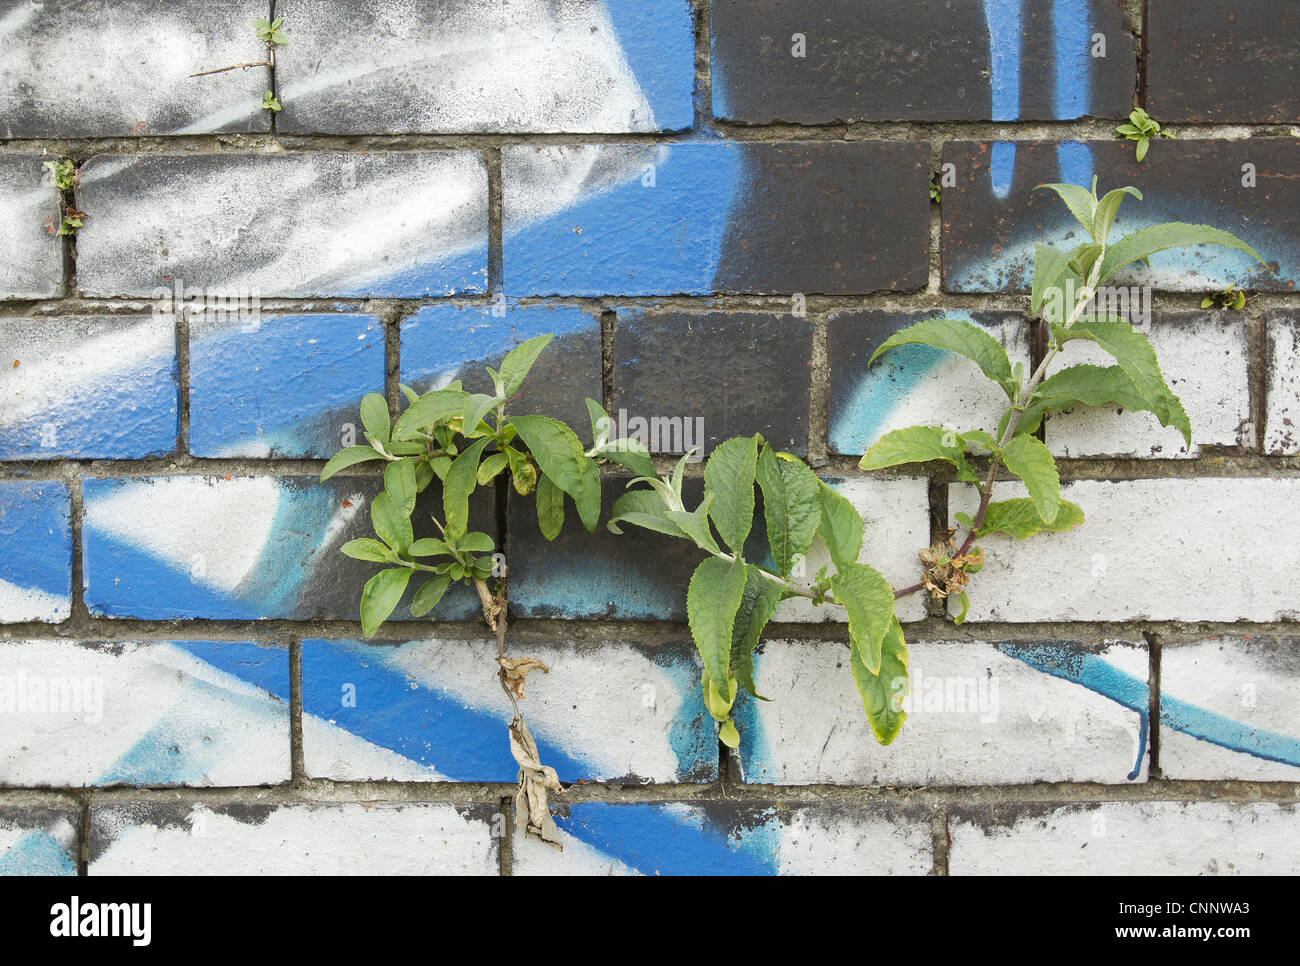 Buddleia Buddleia davidii garden escapee growing crevice graffiti covered wall city centre Sheffield South Yorkshire England may Stock Photo